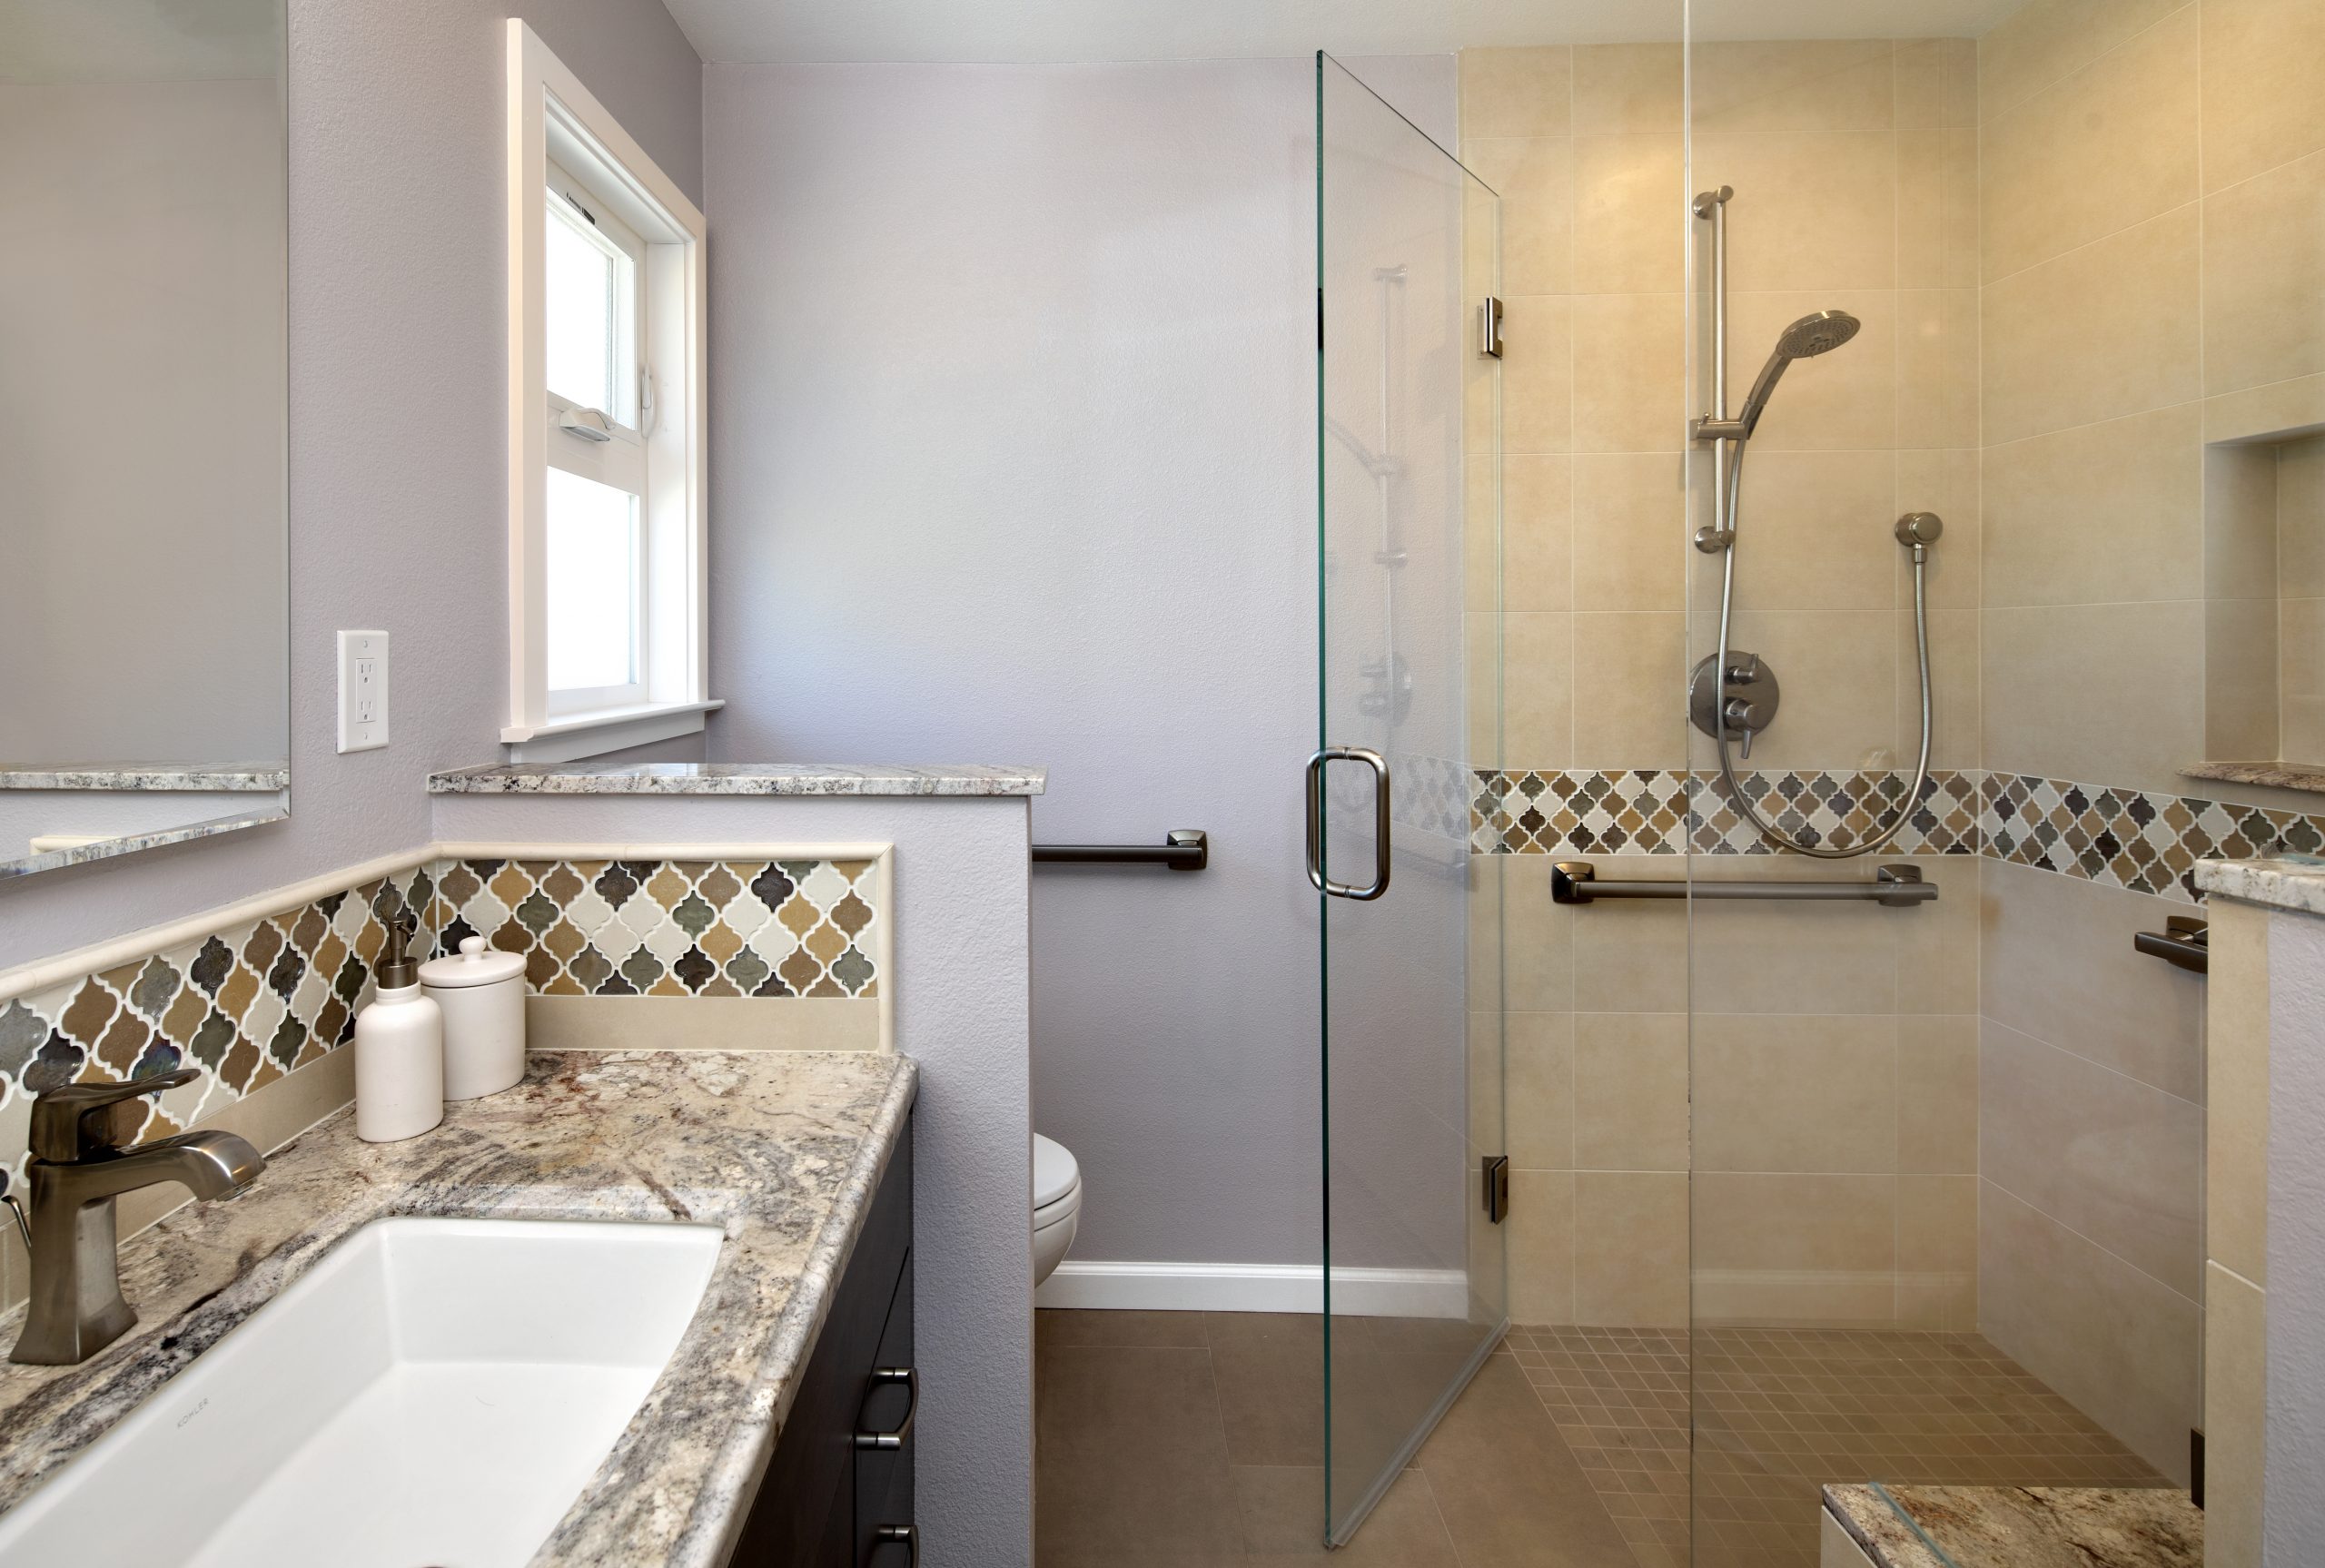 A full glass shower with decorative tile walls.